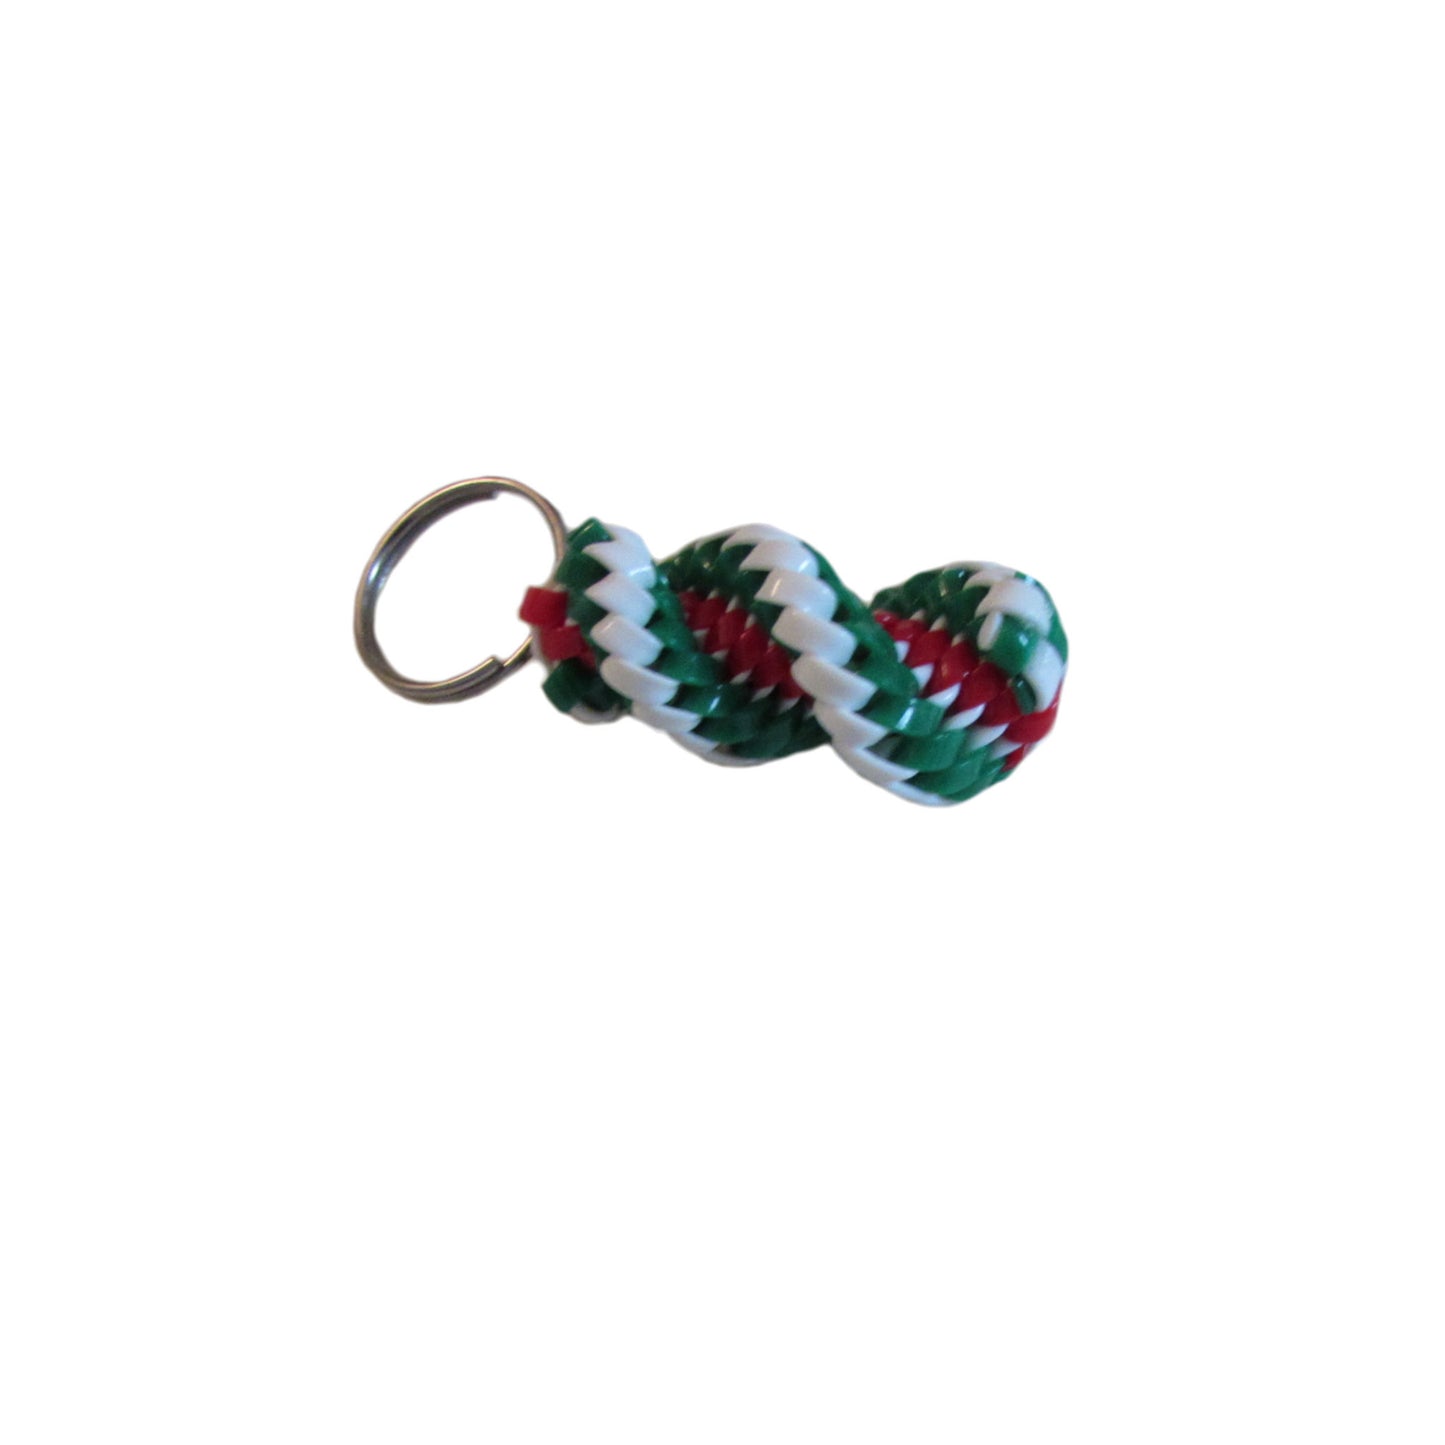 Small Red Green White Plastic Lacing Key Chain Left view